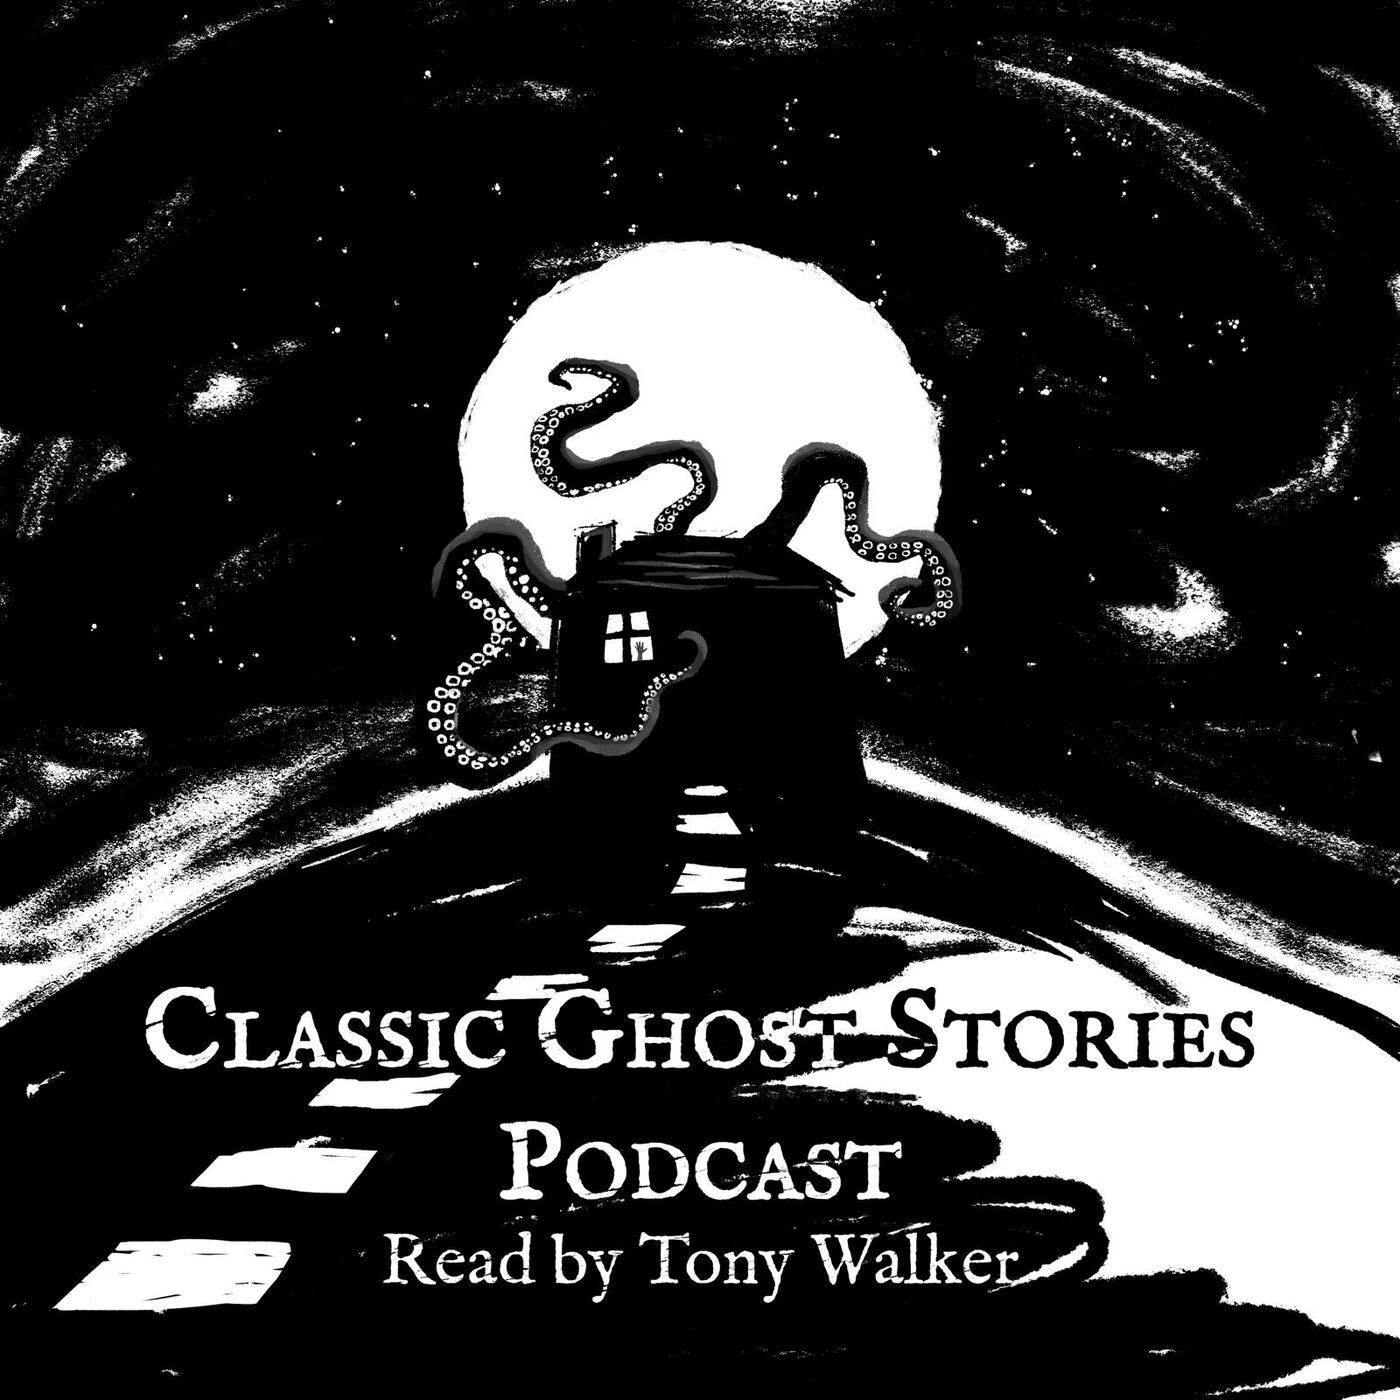 Classic Ghost Stories Podcast Trailer